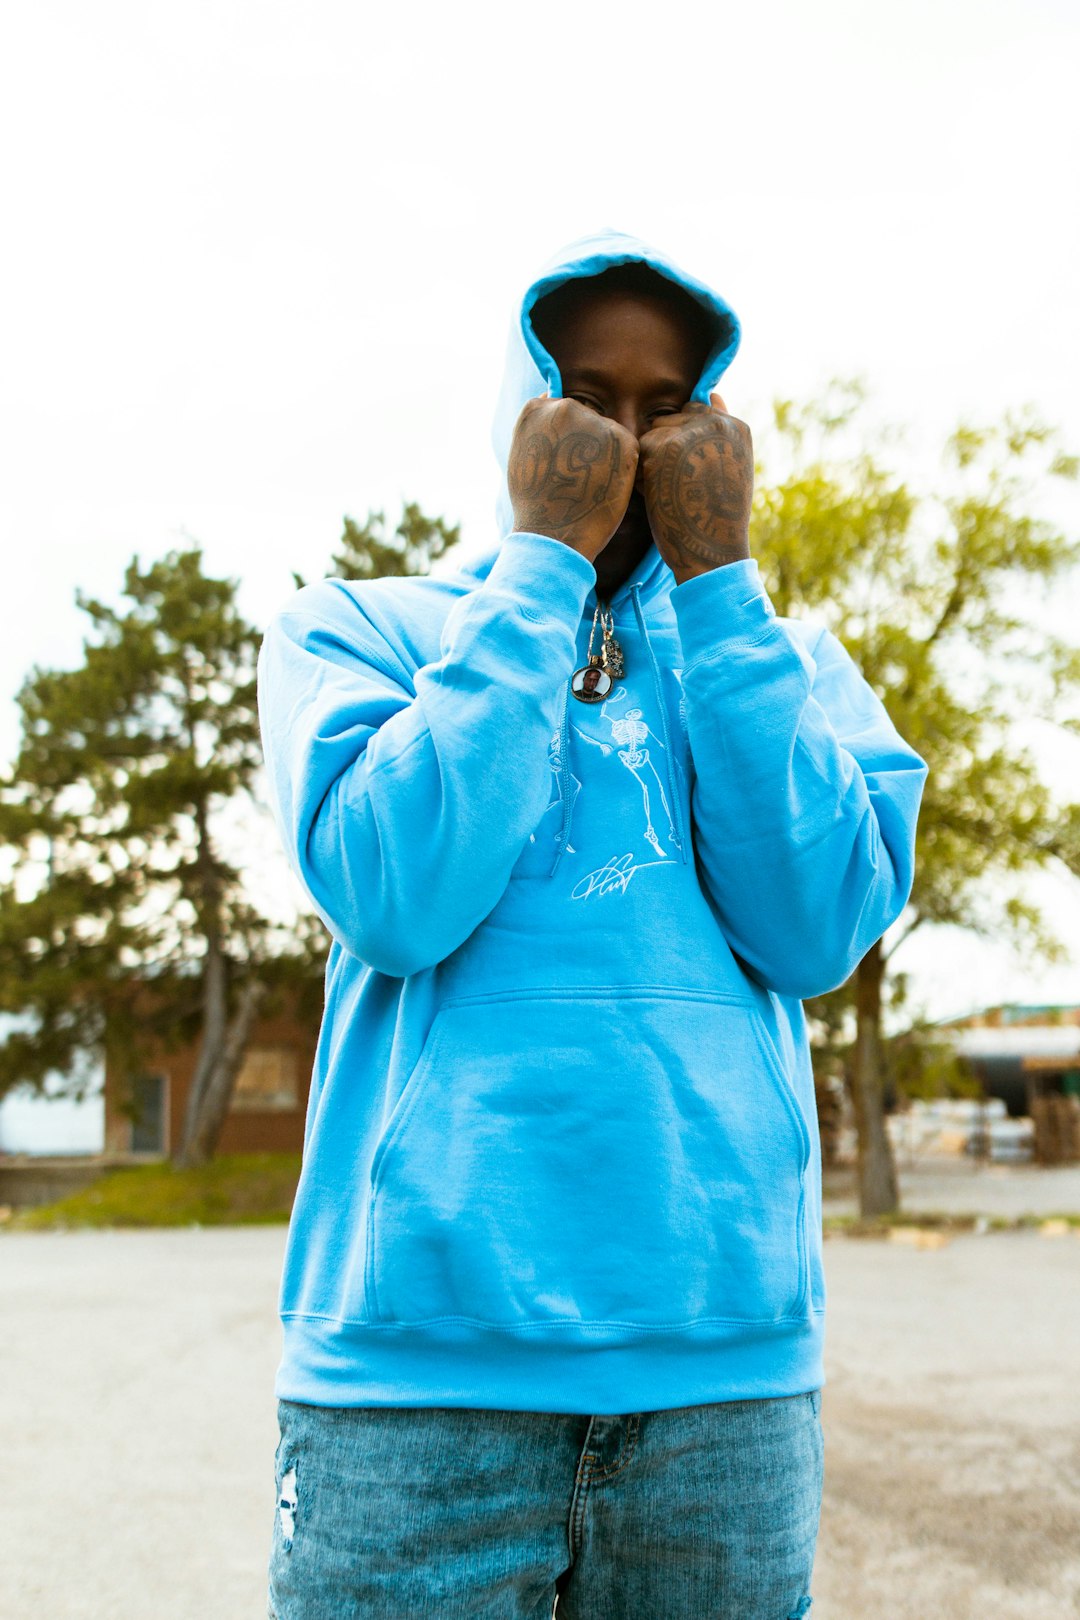 man in blue long sleeve shirt covering his face with his hand